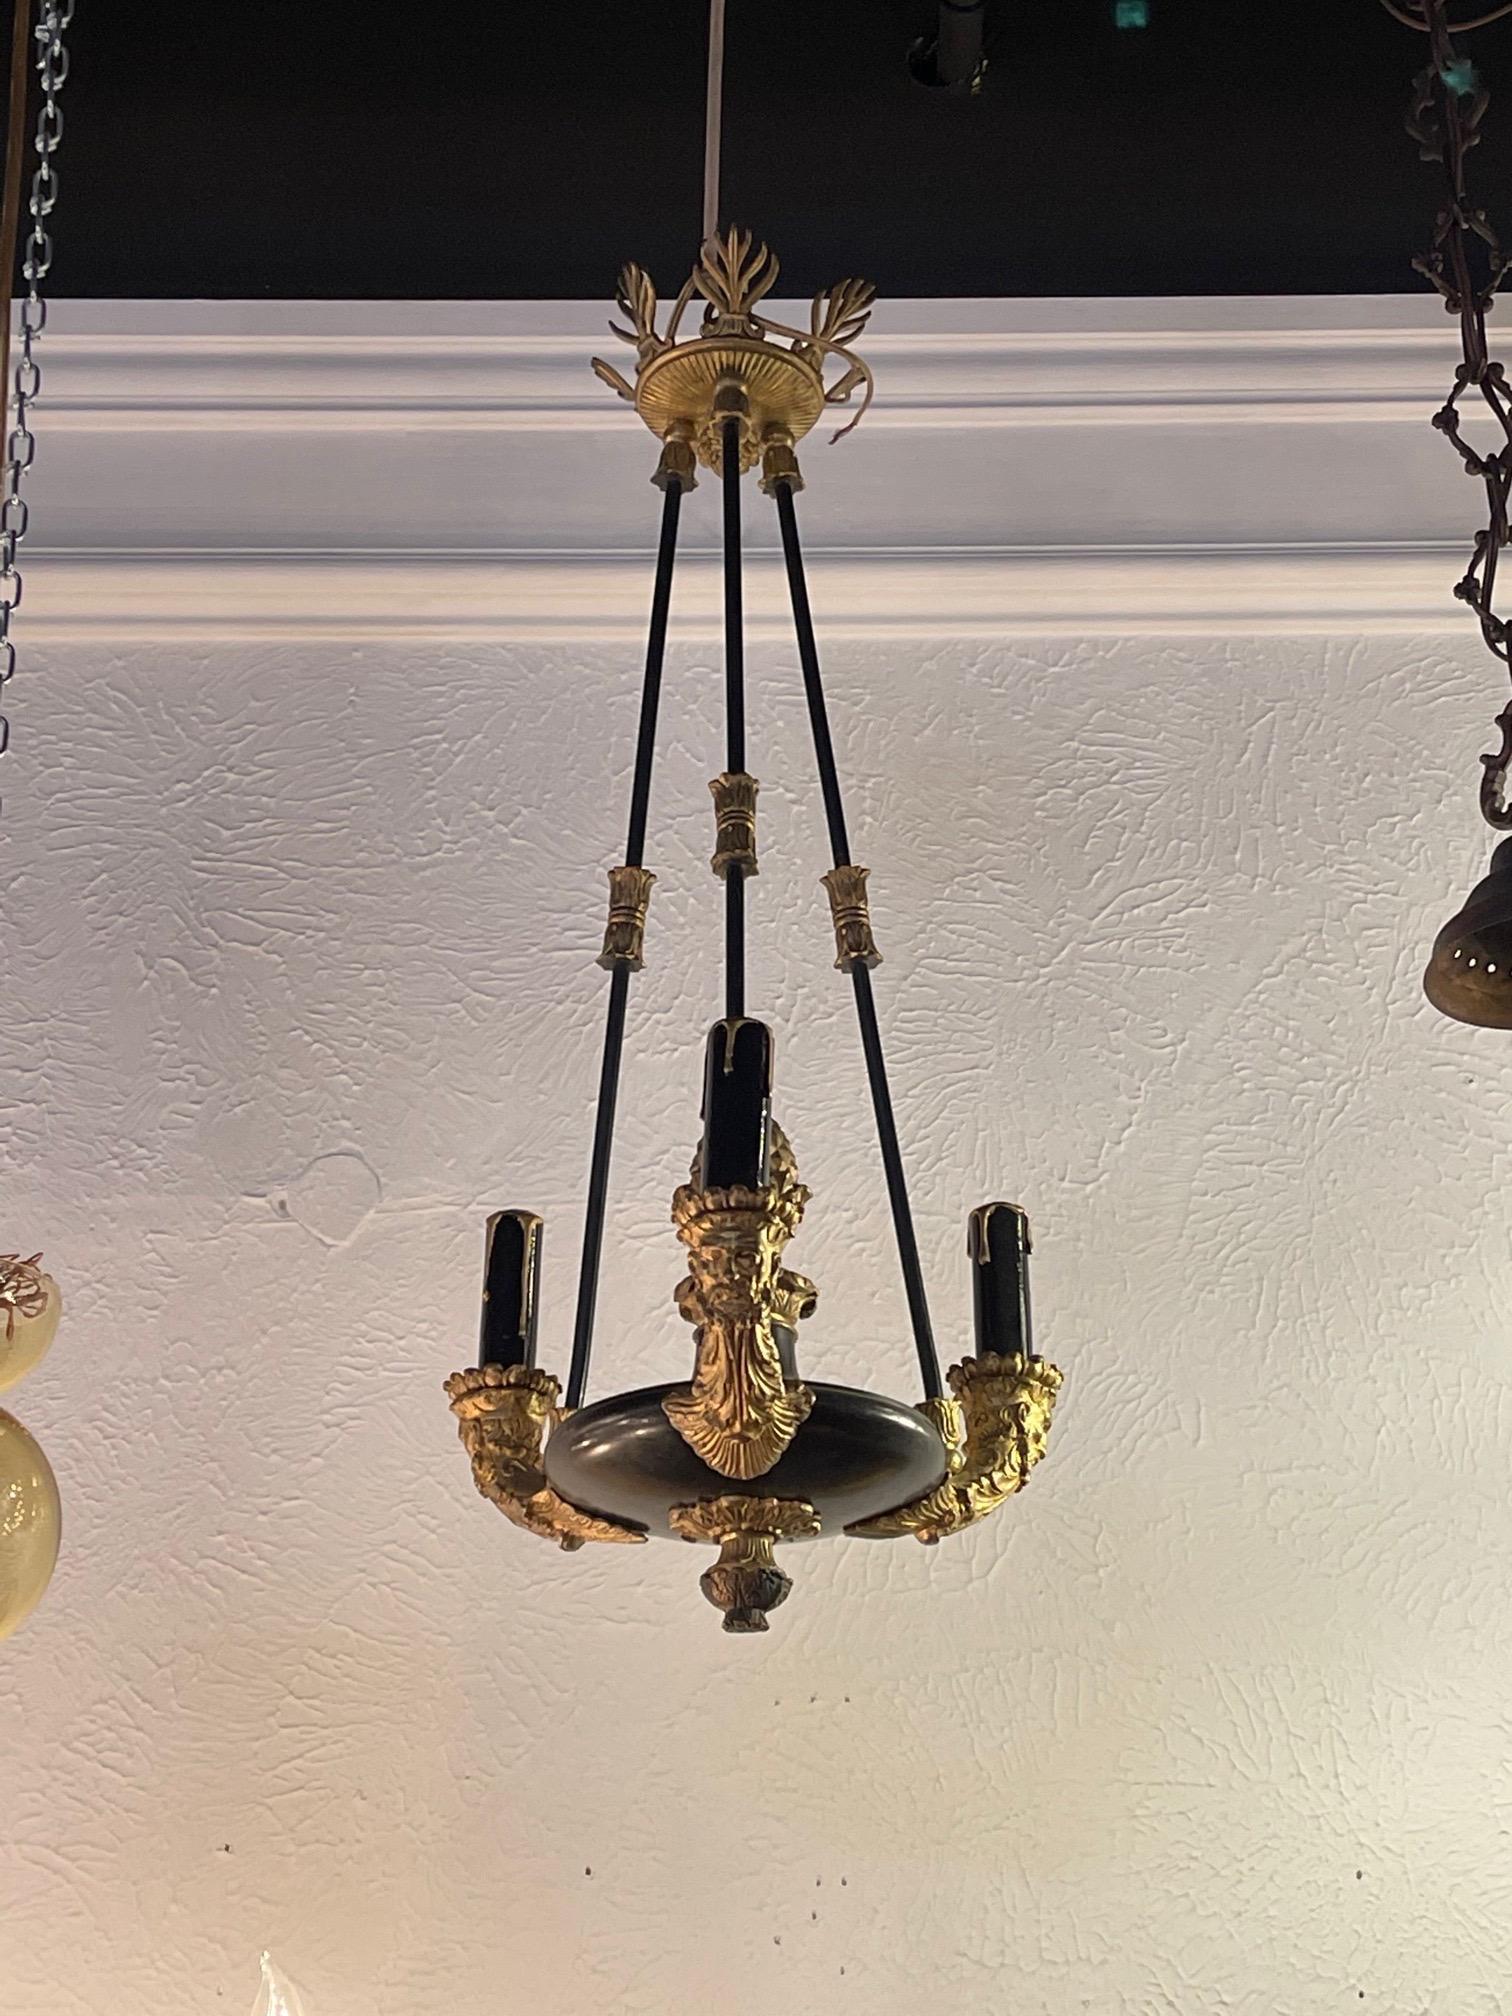 Rare small 19th century French Empire style gilt bronze chandelier with 3 lights. Interesting details including a male face on the arms. This gorgeous fixture makes a real impact!!